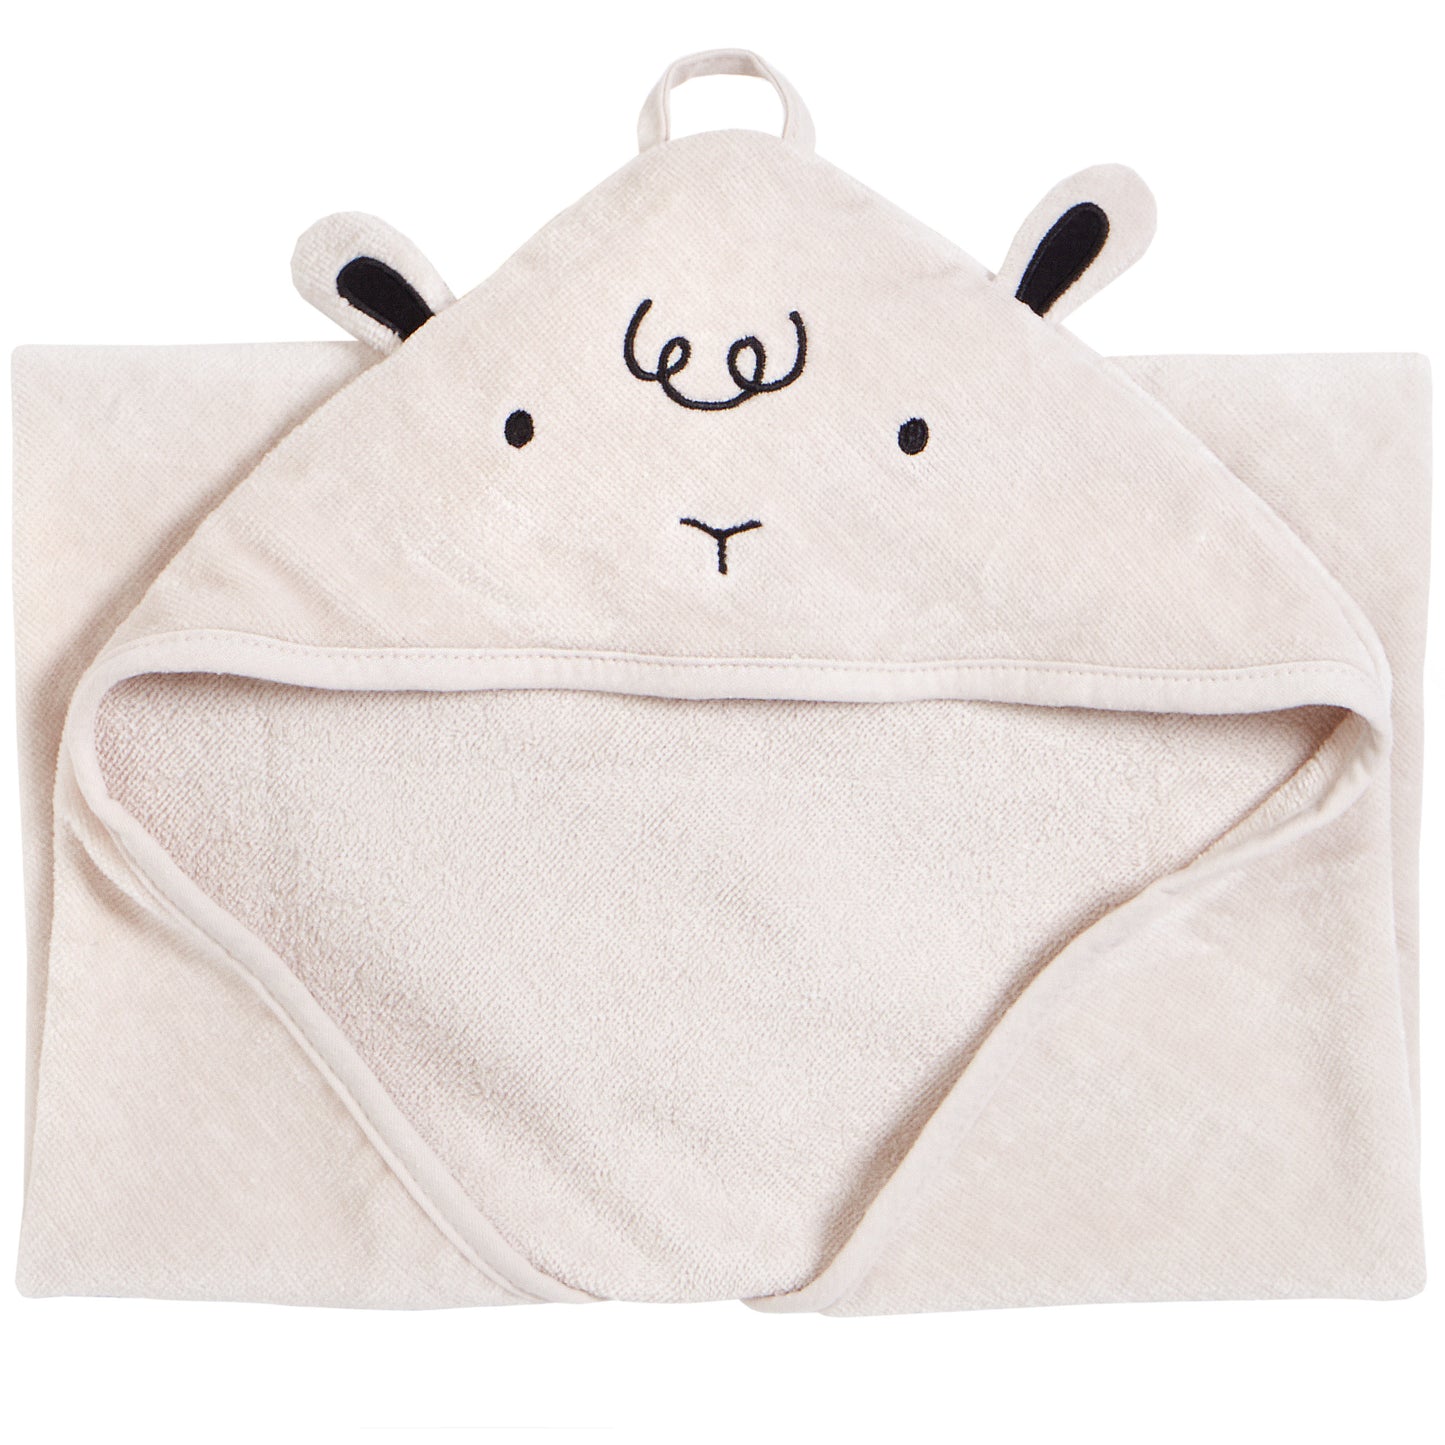 Little Lamb Hooded Towel and Wash Cloths